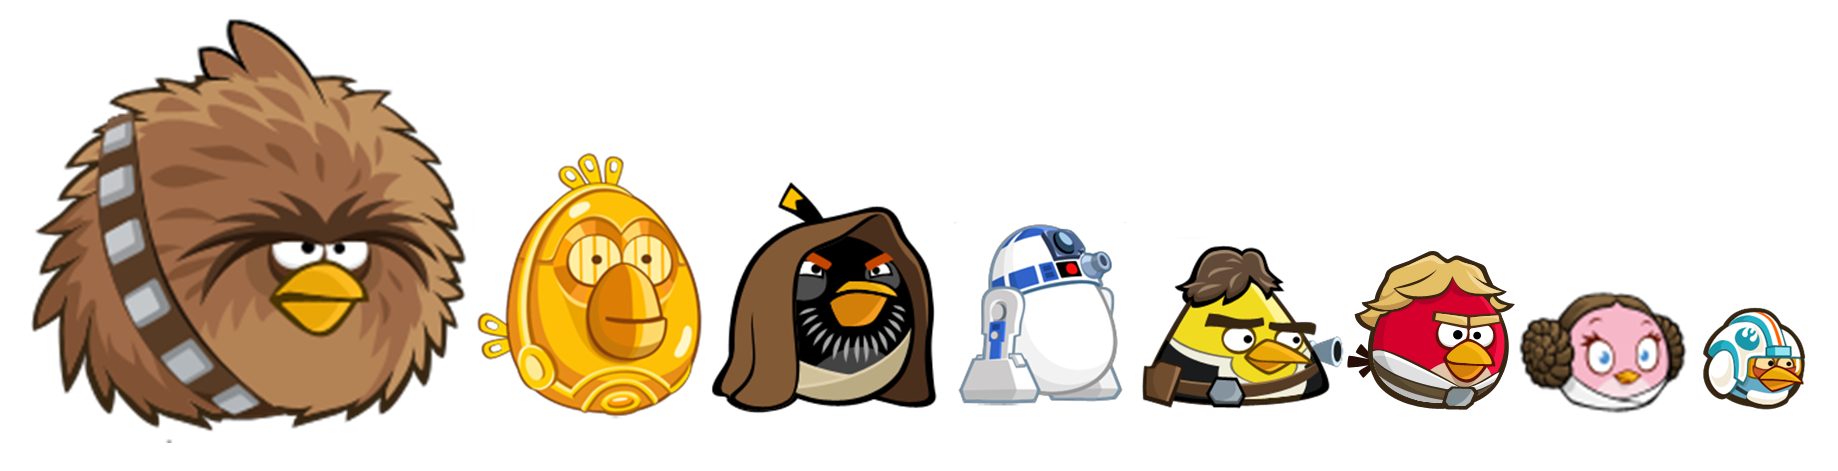 Angry Birds: Star Wars #6